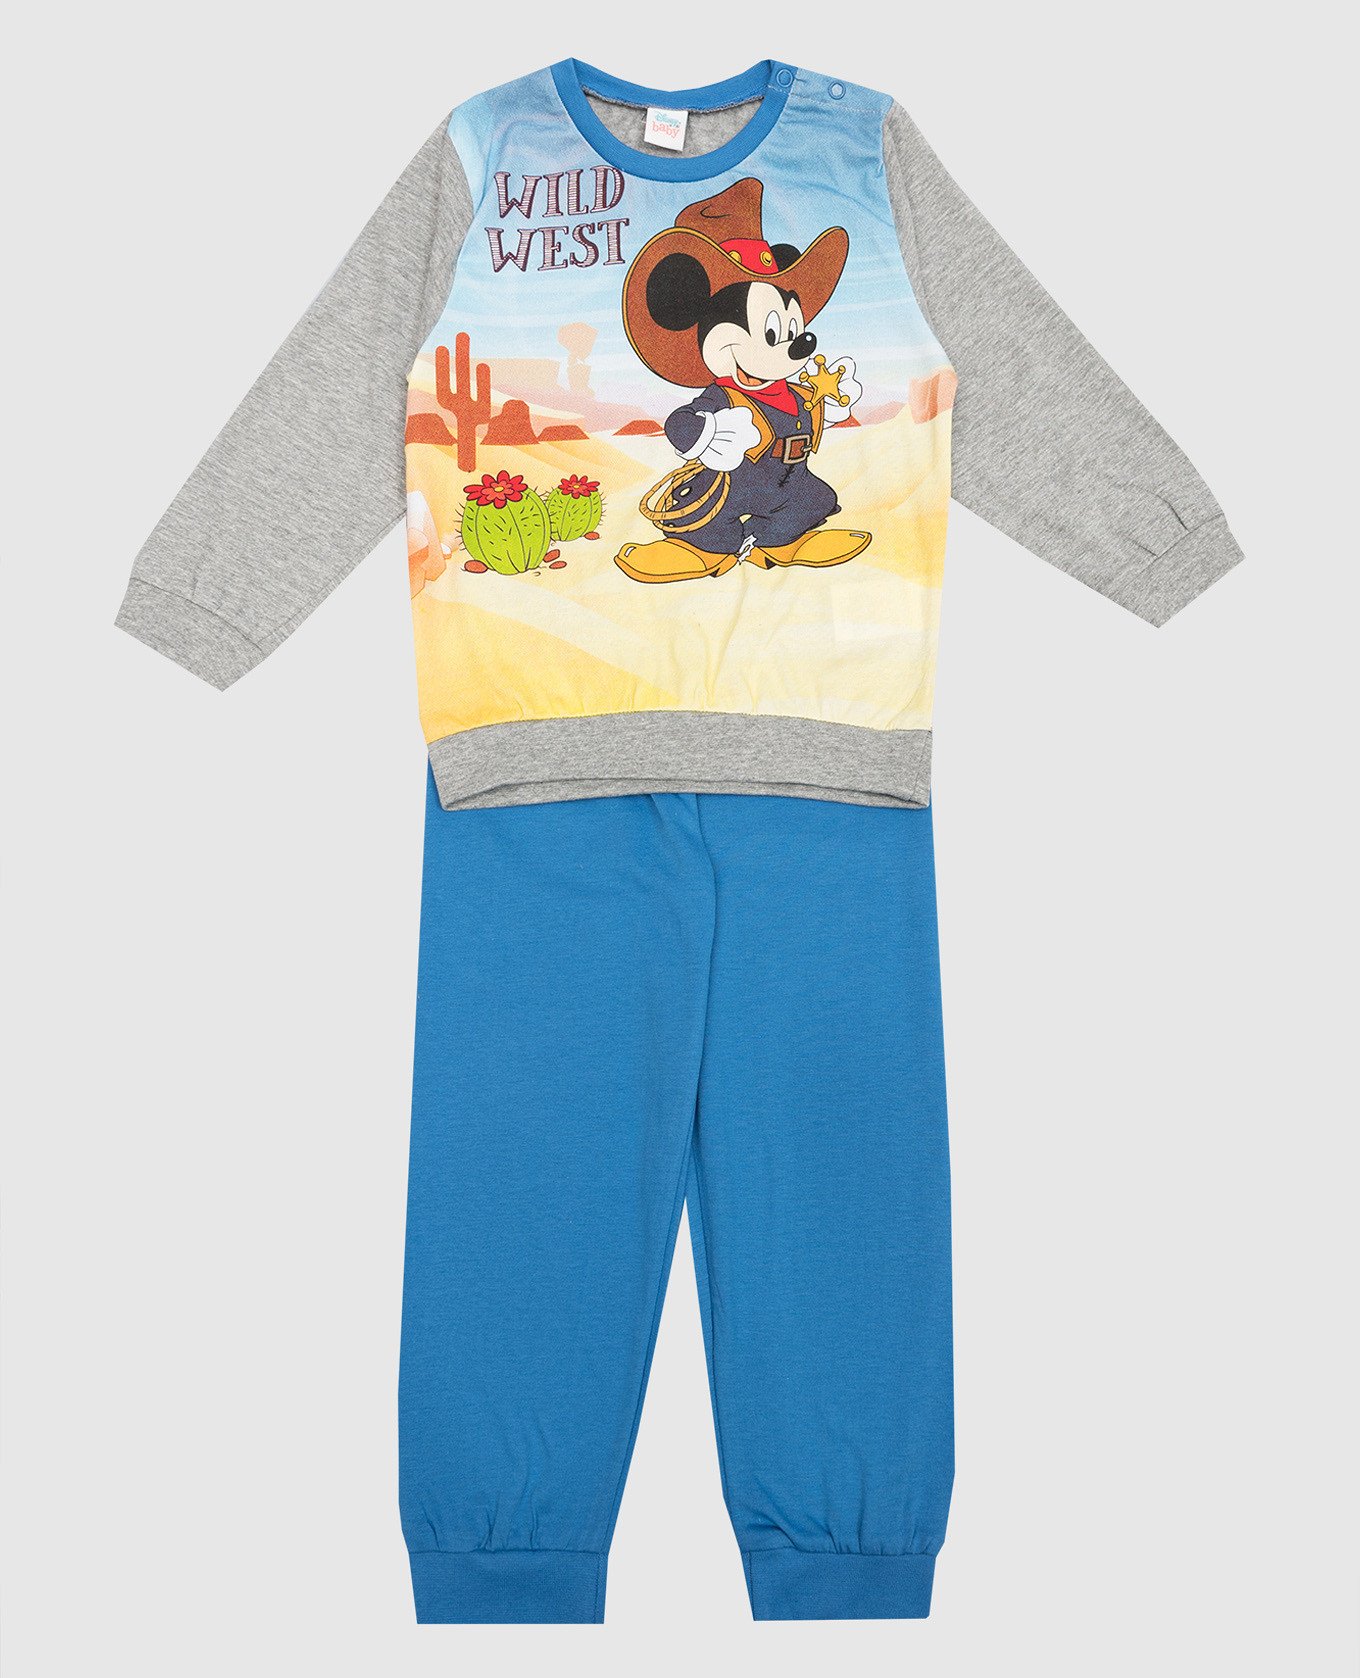 Children's pajamas with a print